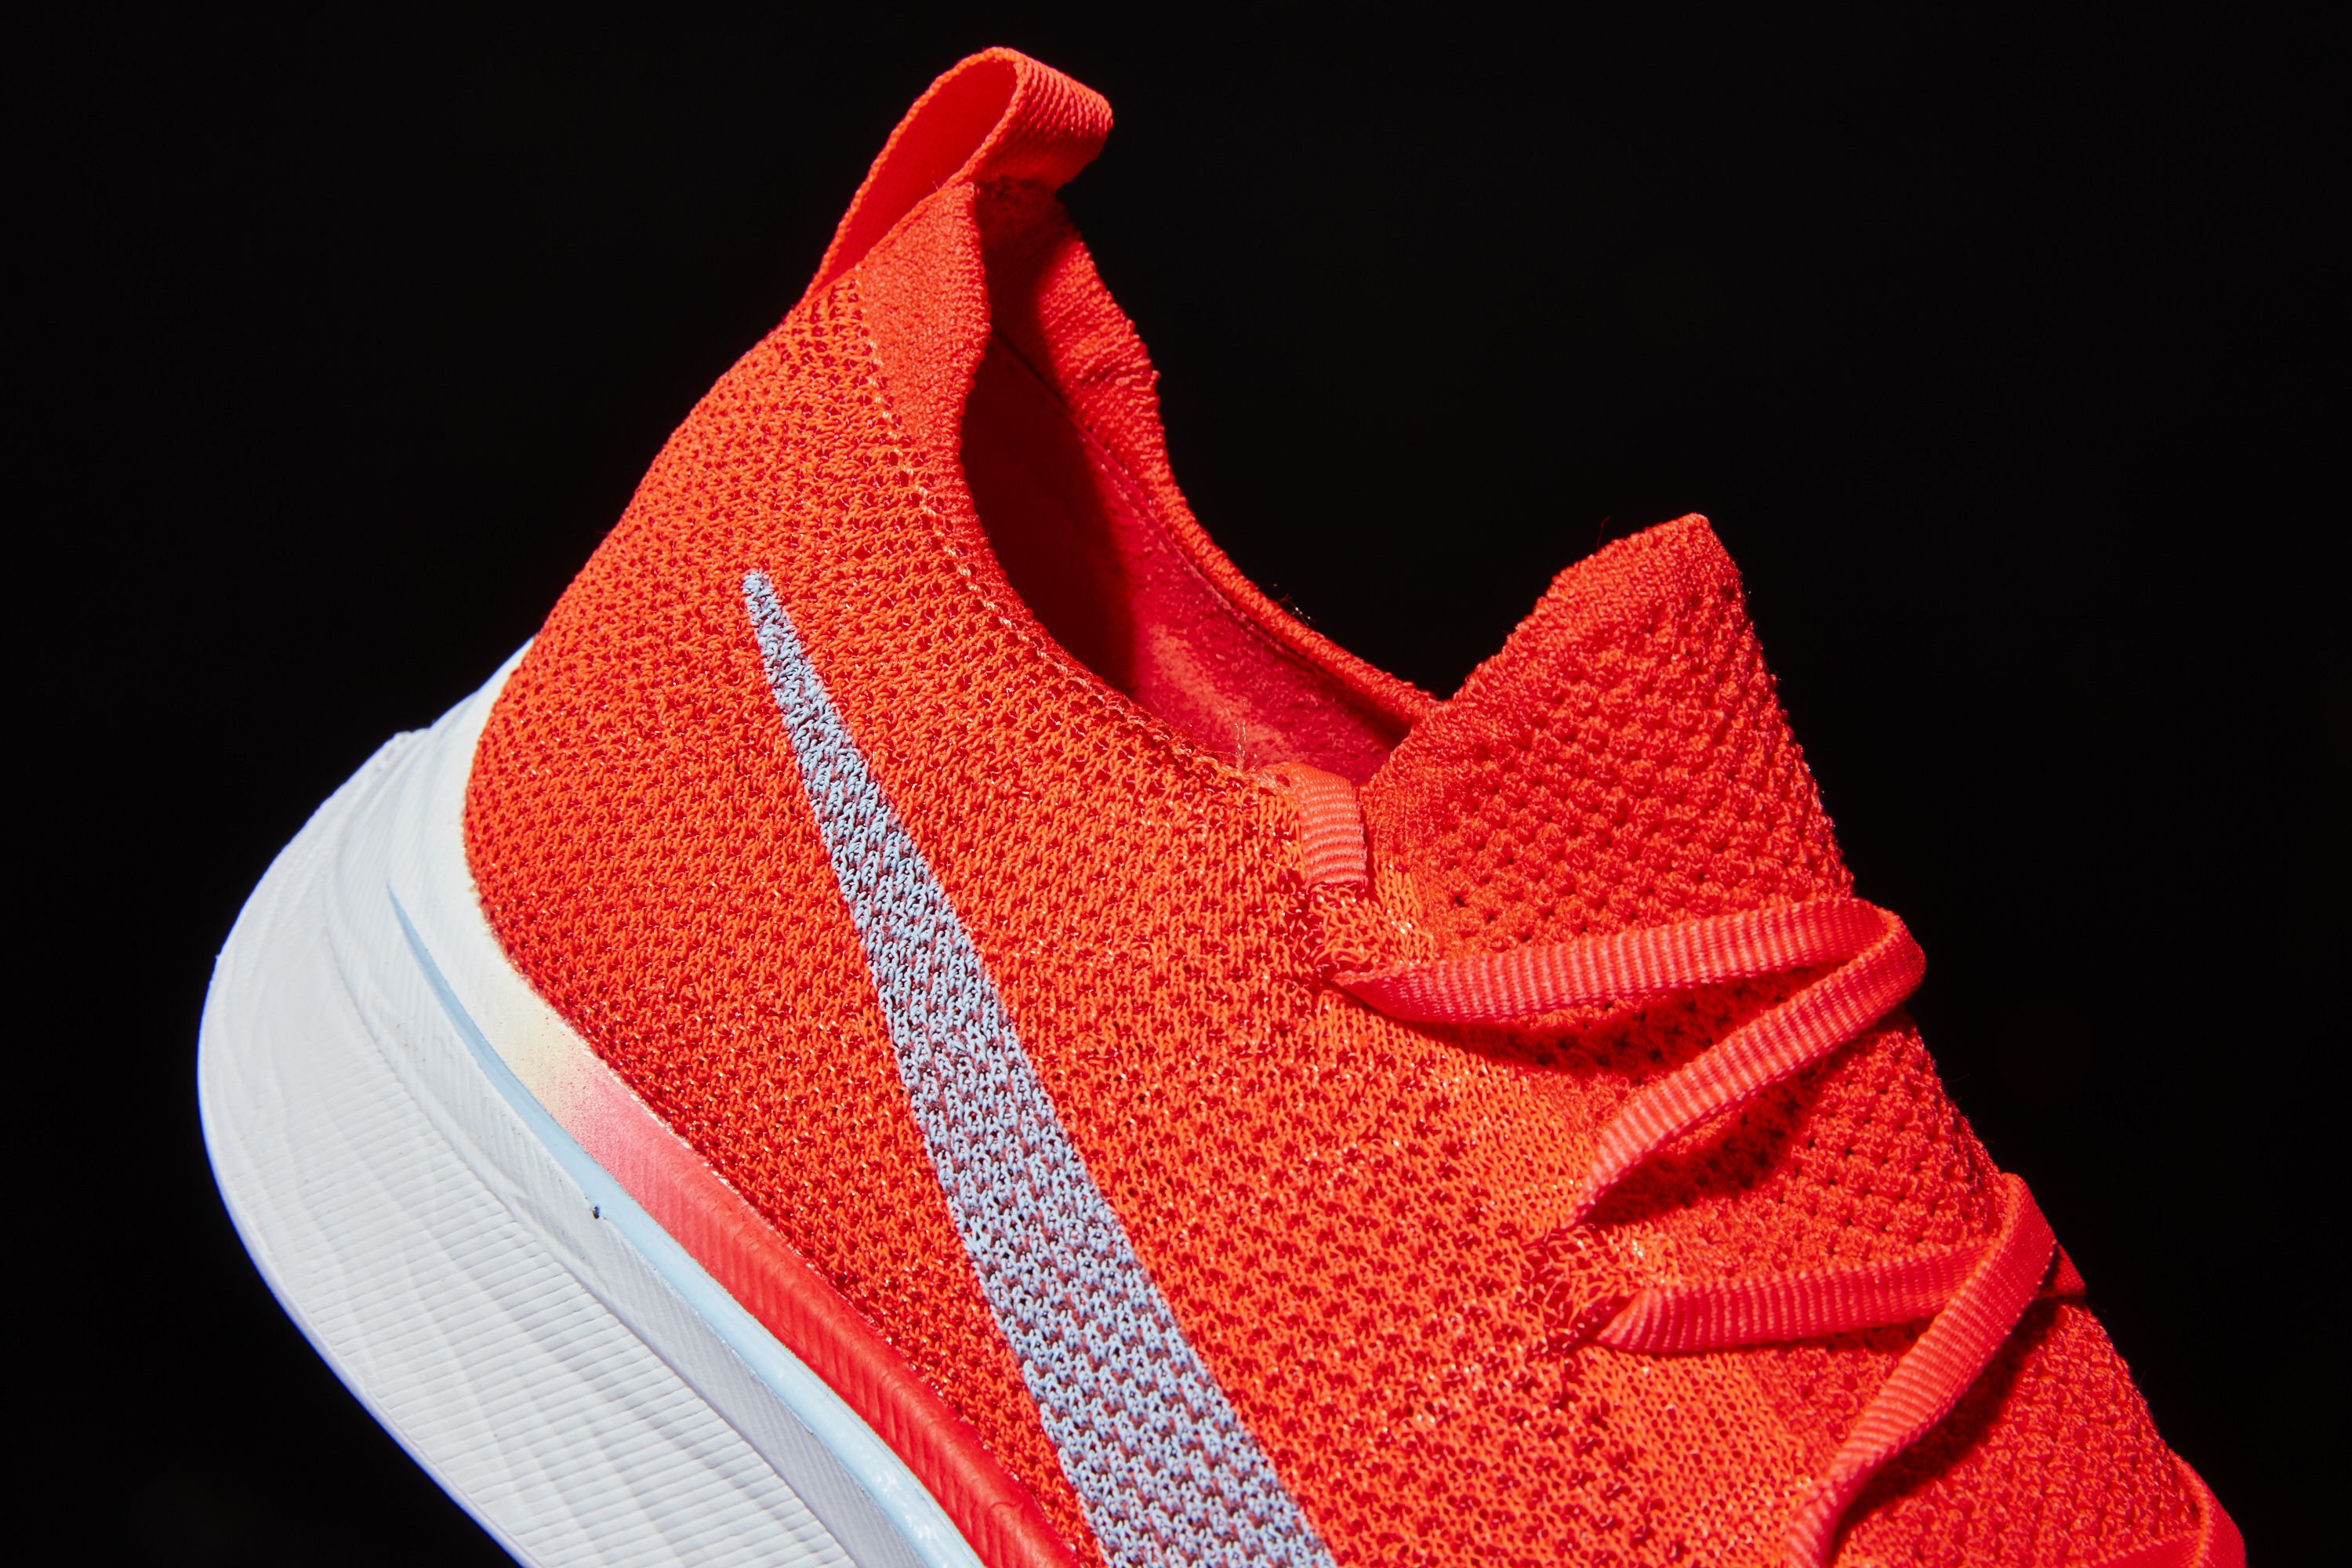 Nike Announces the Vaporfly 4% Flyknit, Updating Its Speed-Racing 